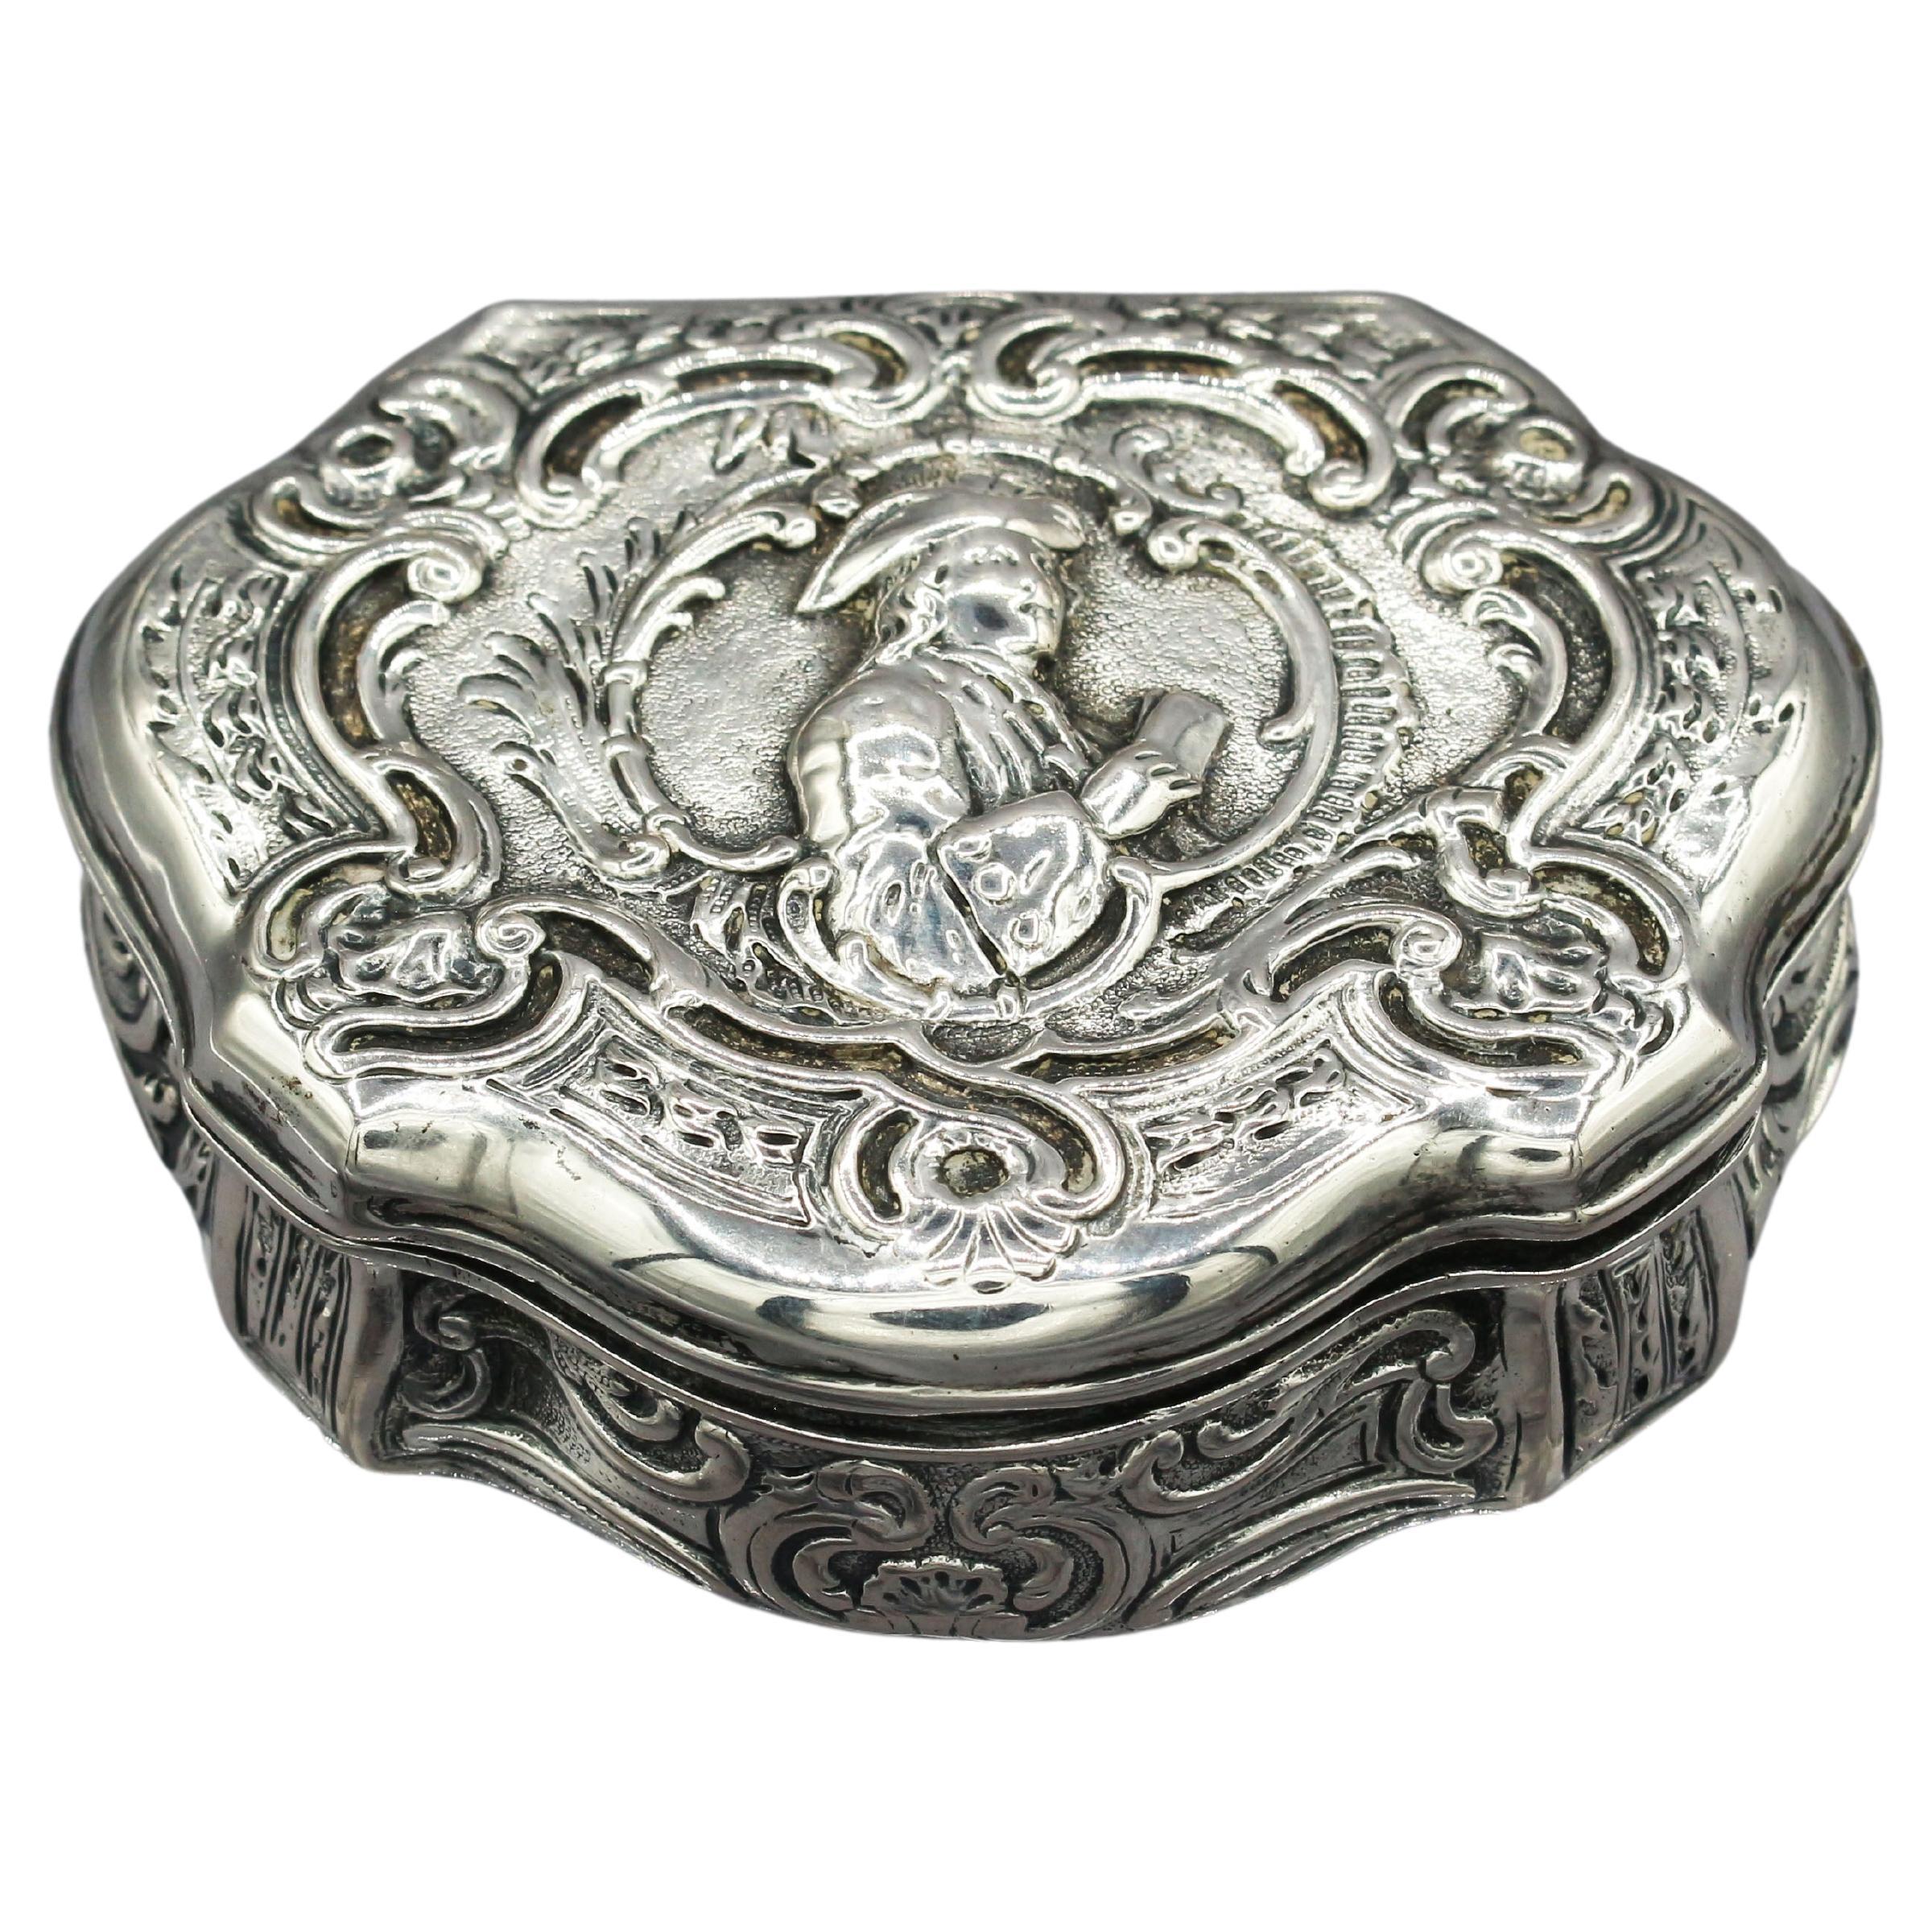 19th Century Grand Tour Silver Box, likely made in Germany